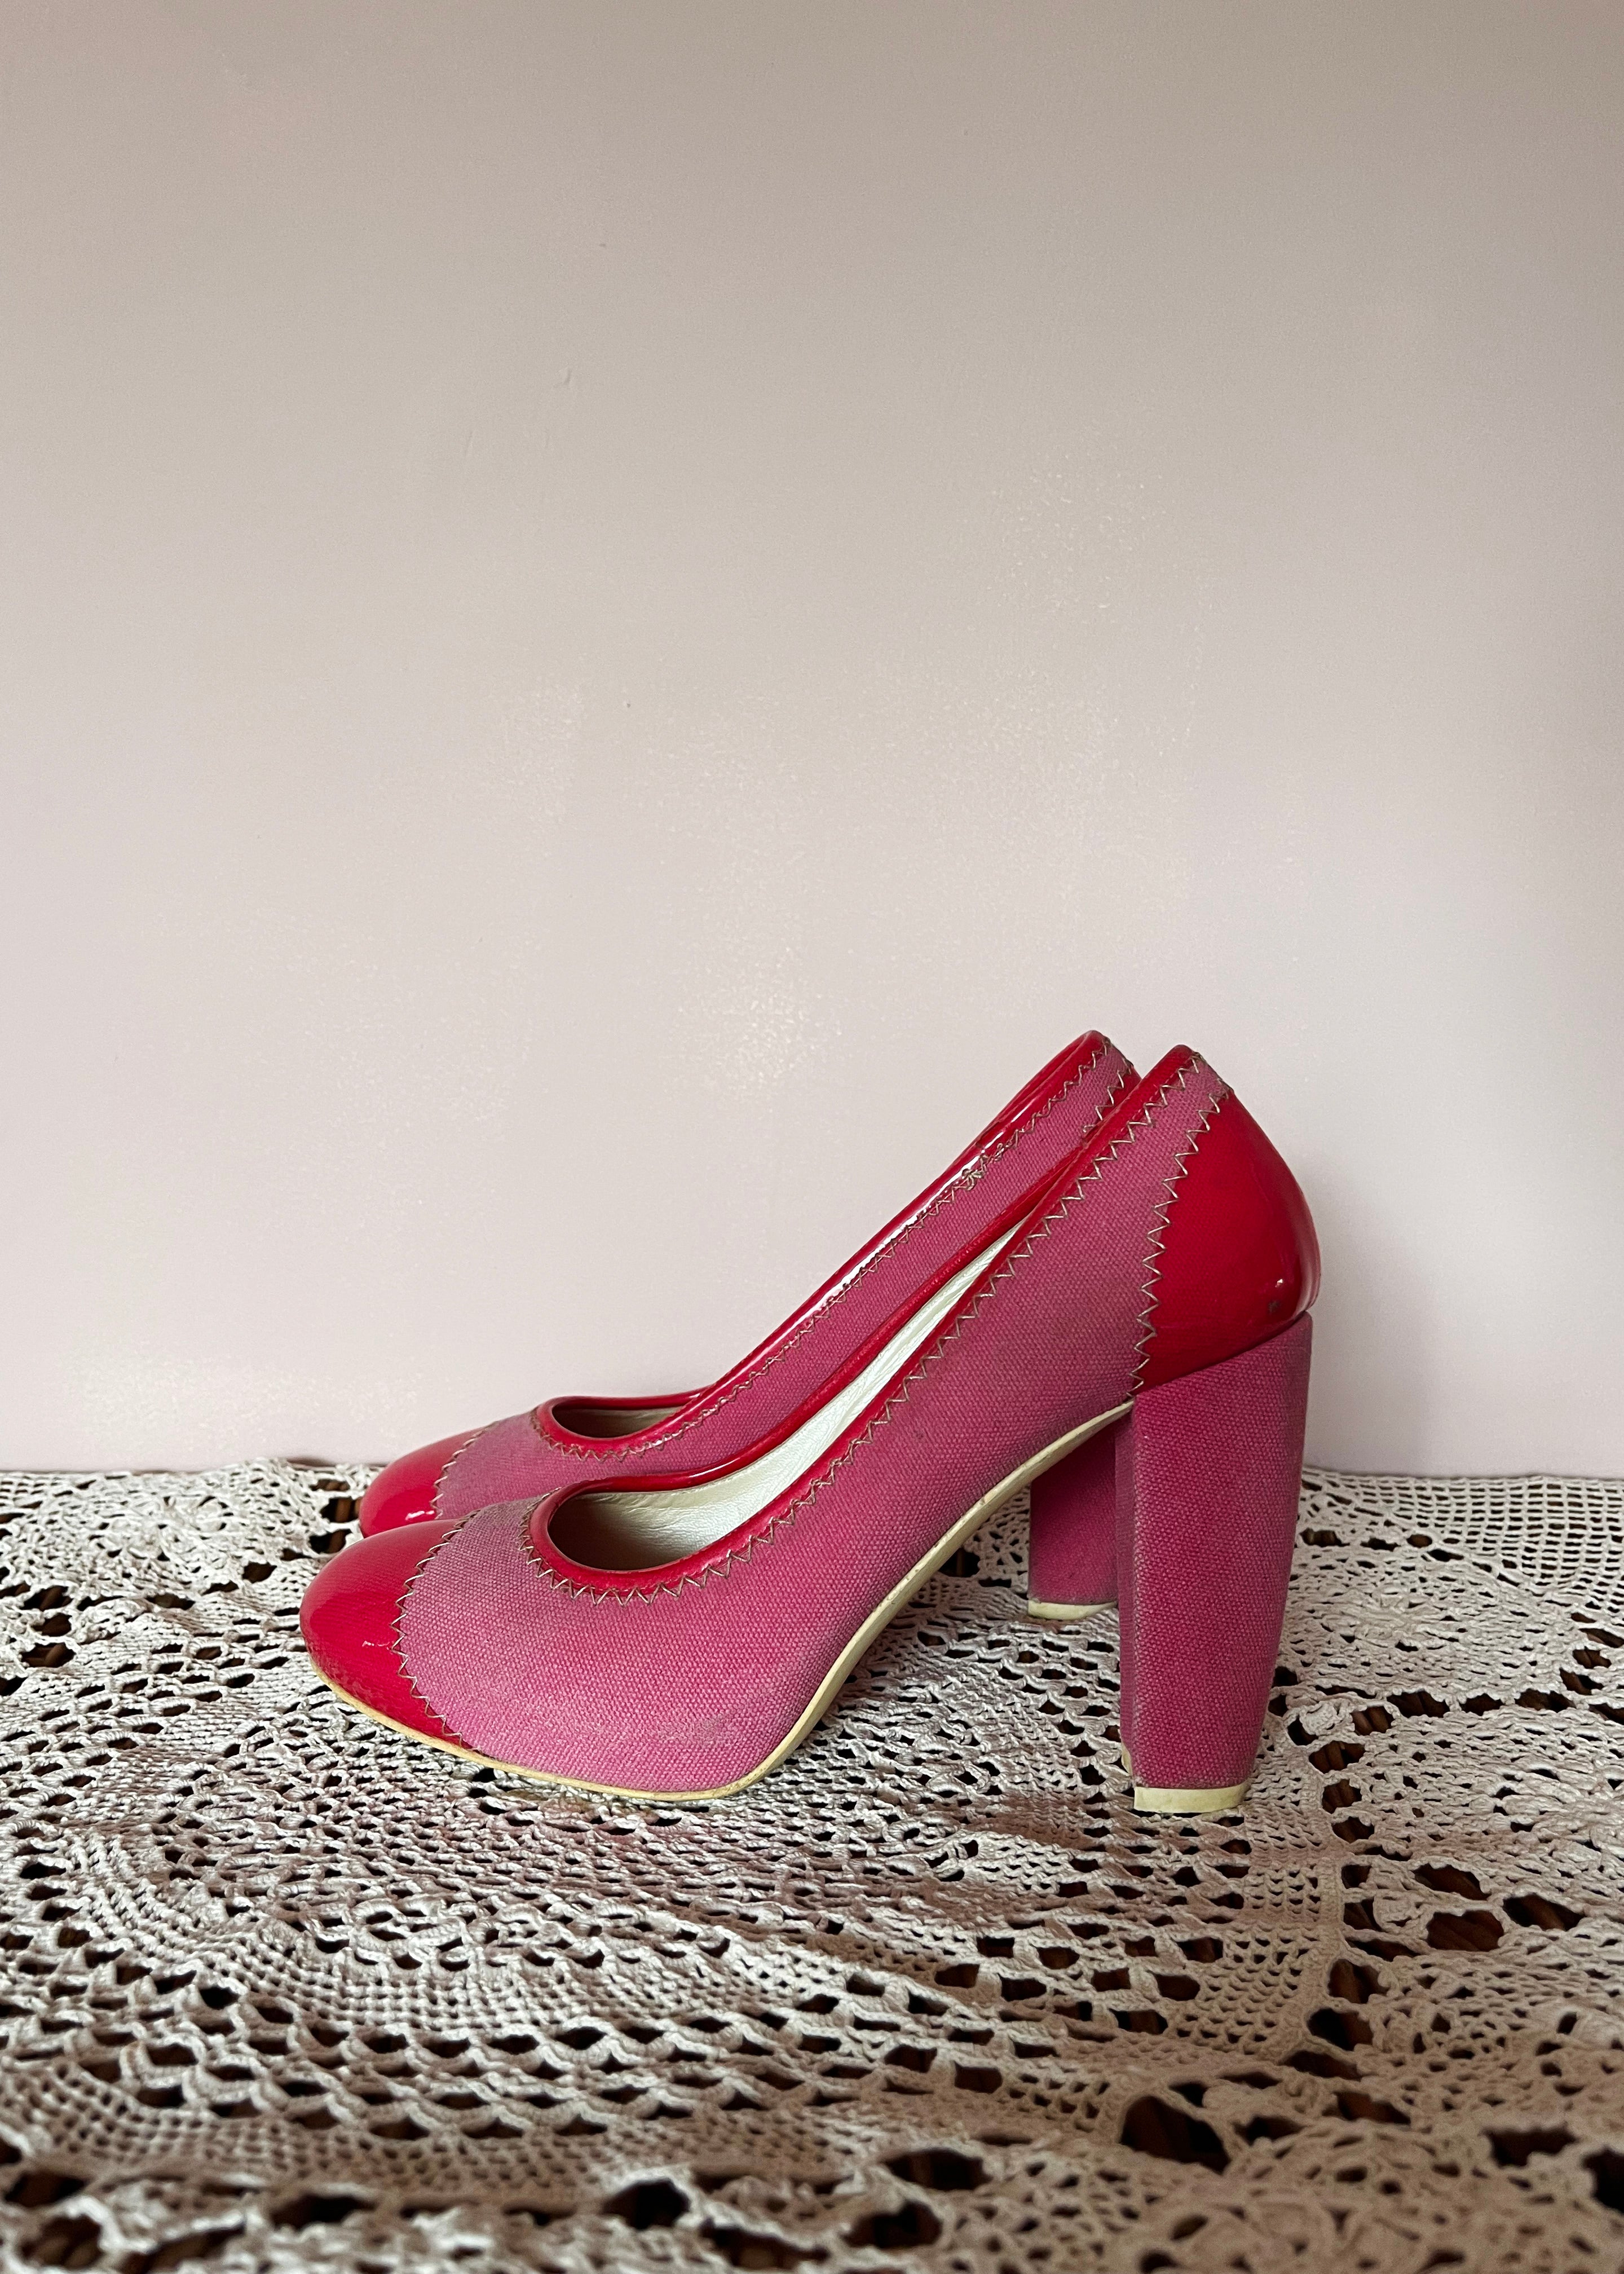 Theory Red and Pink Heeled Pumps